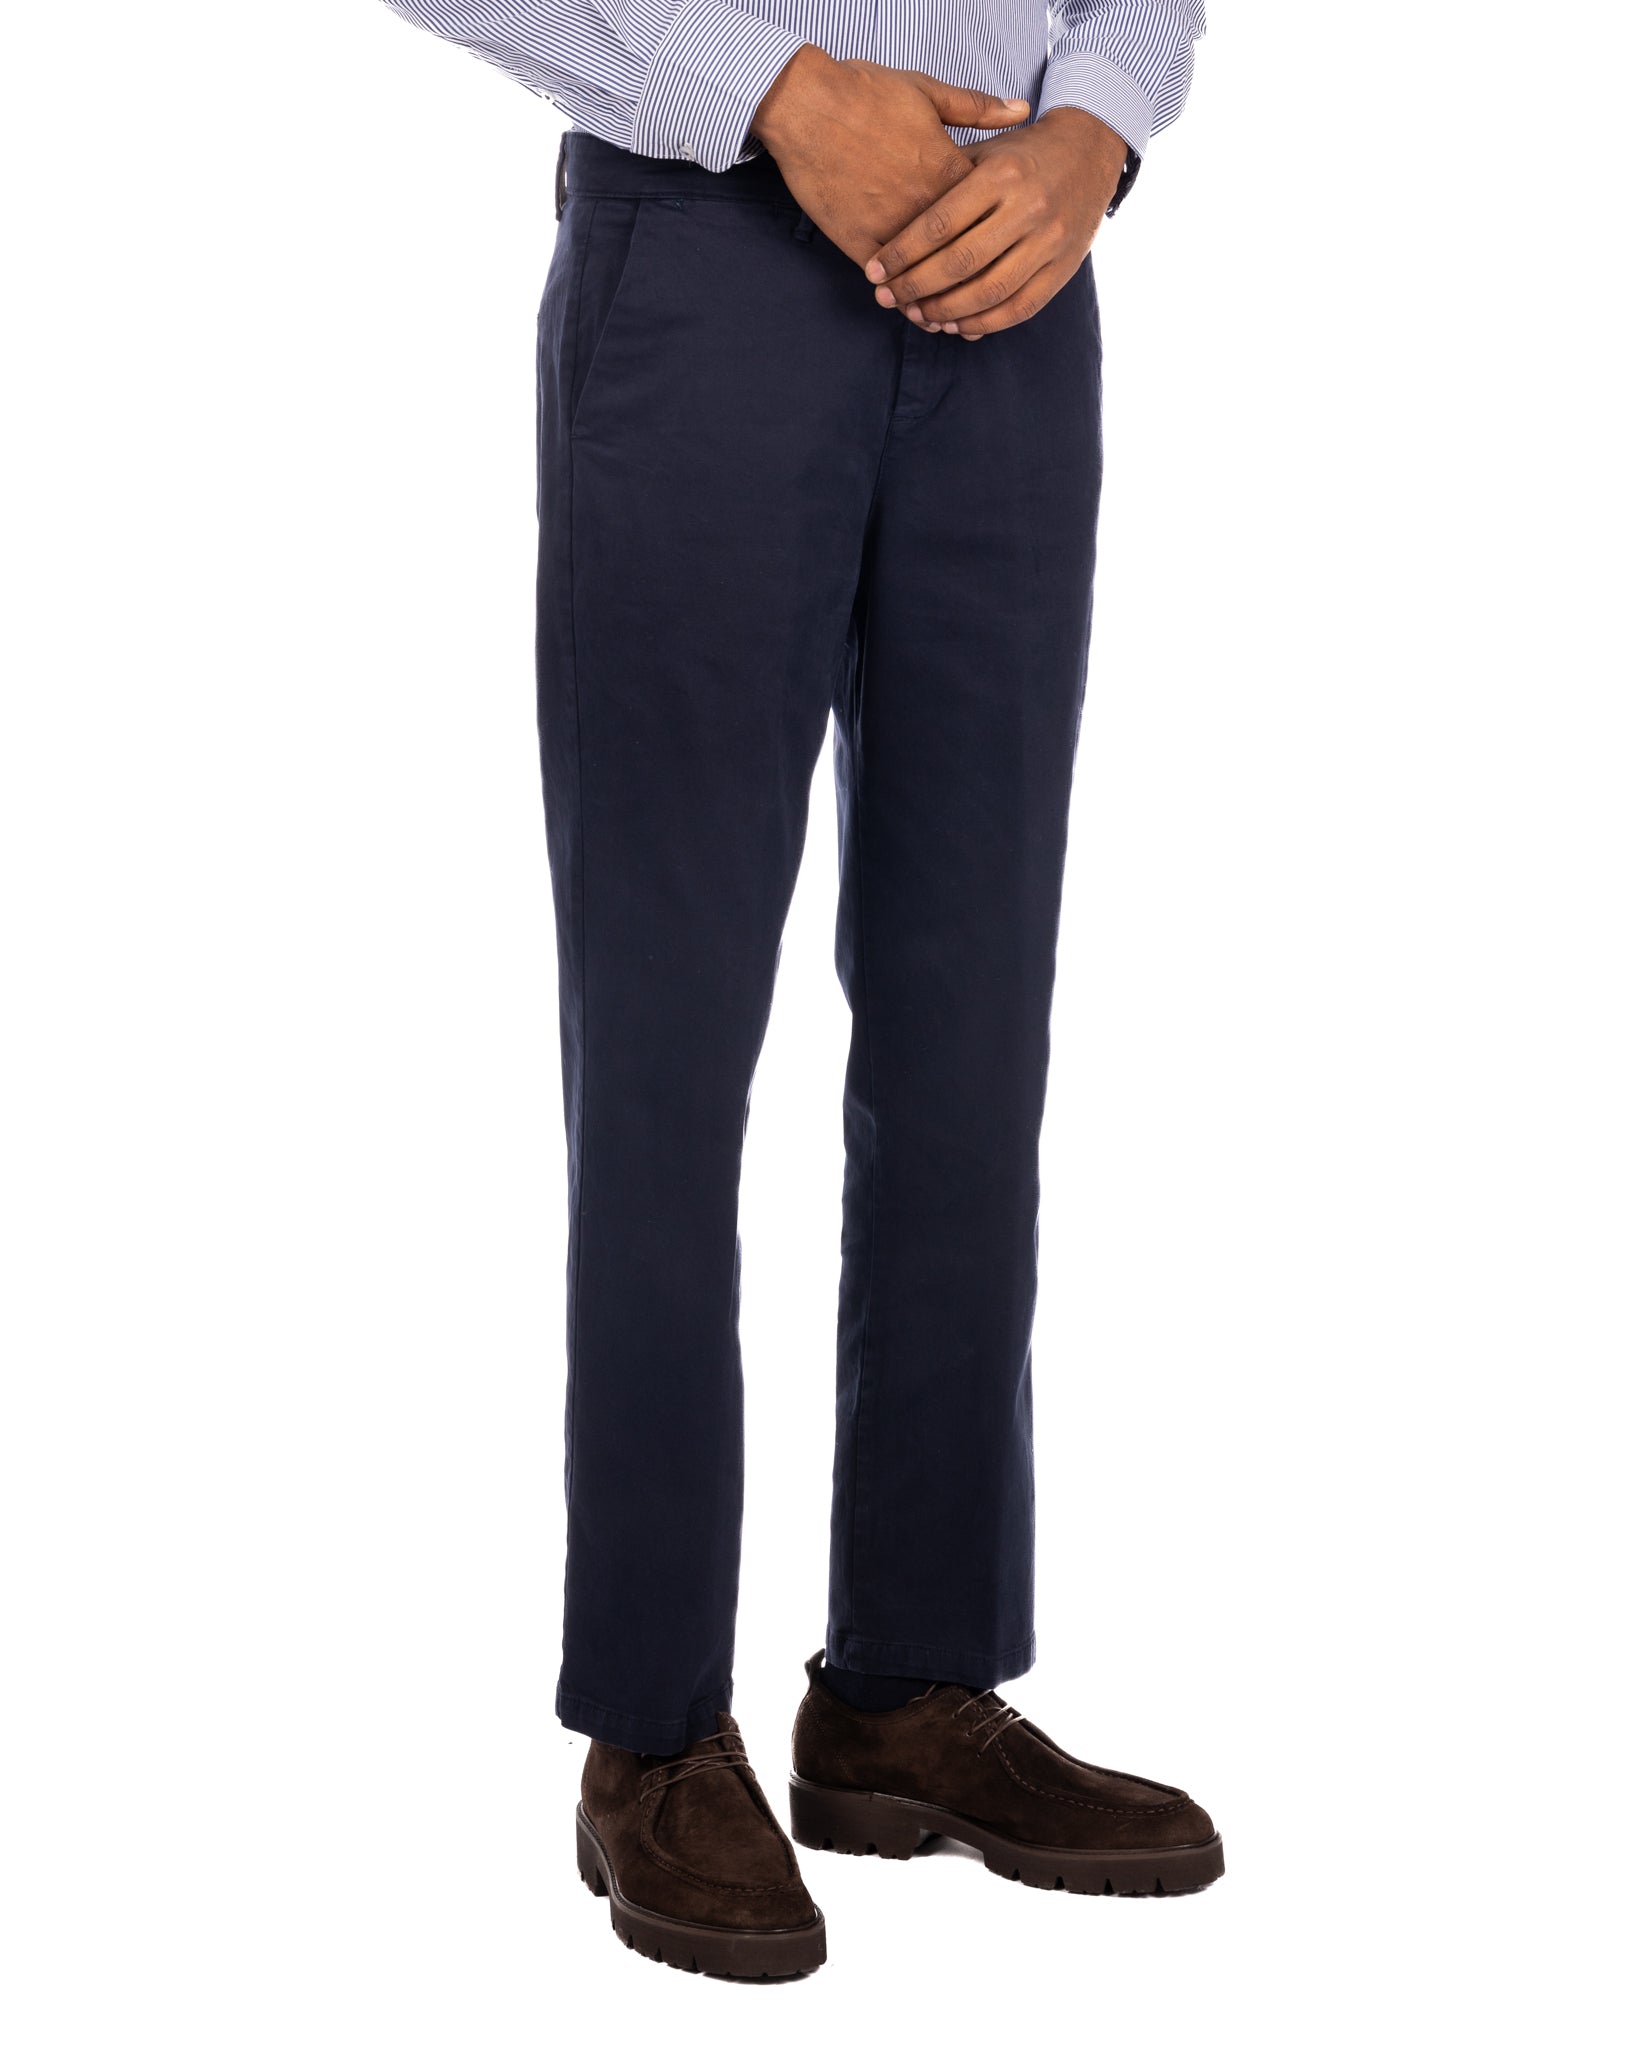 Sorrento - blue wide bottom trousers